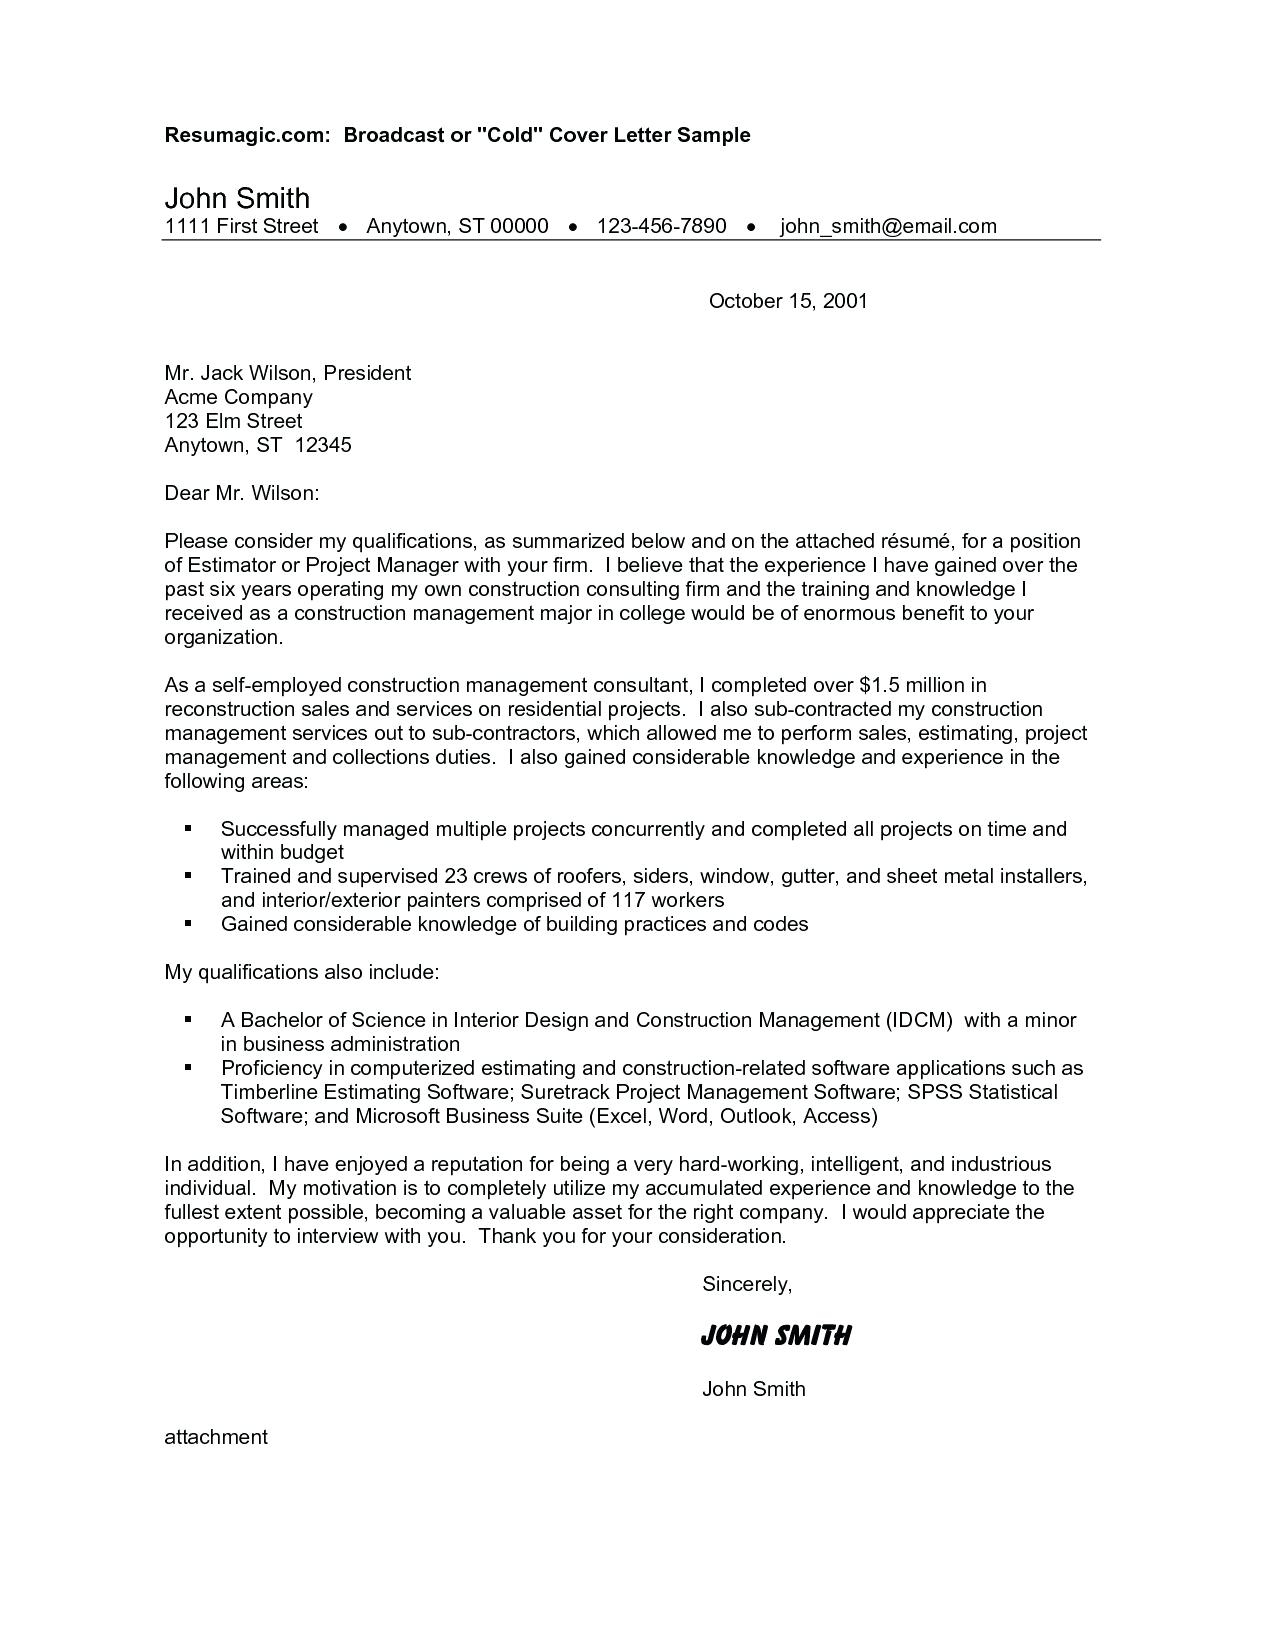 12 Air Force Letter Of Counseling Examples | Resume Letter In Letter Of Counseling Template